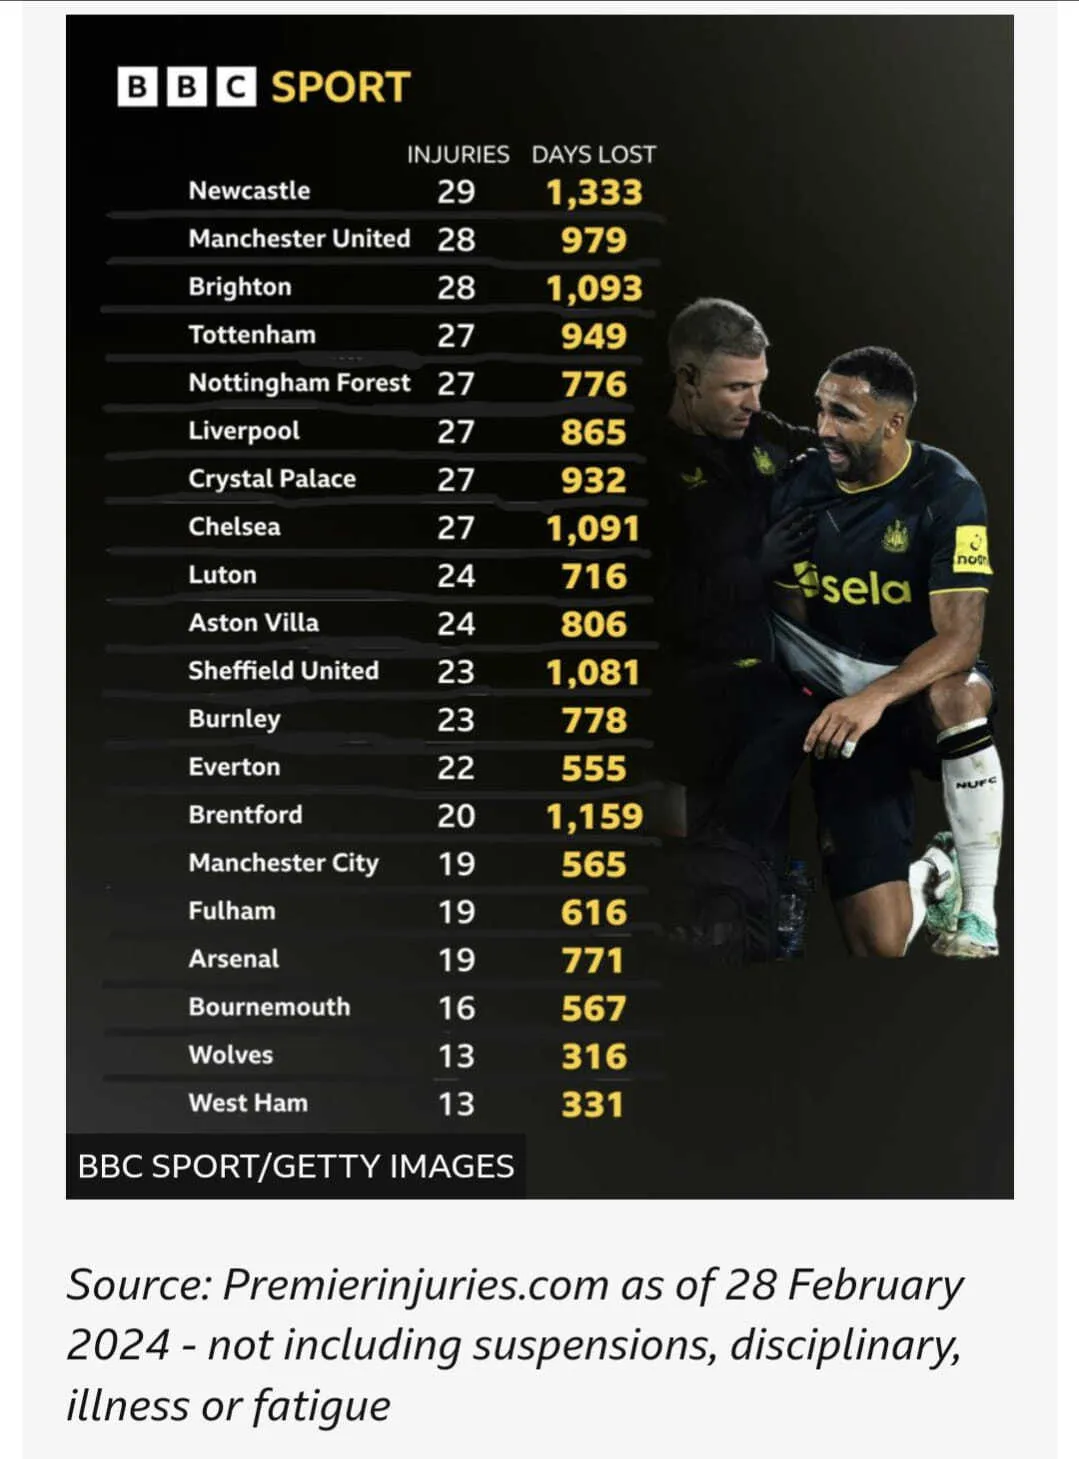 Injuries in the PL